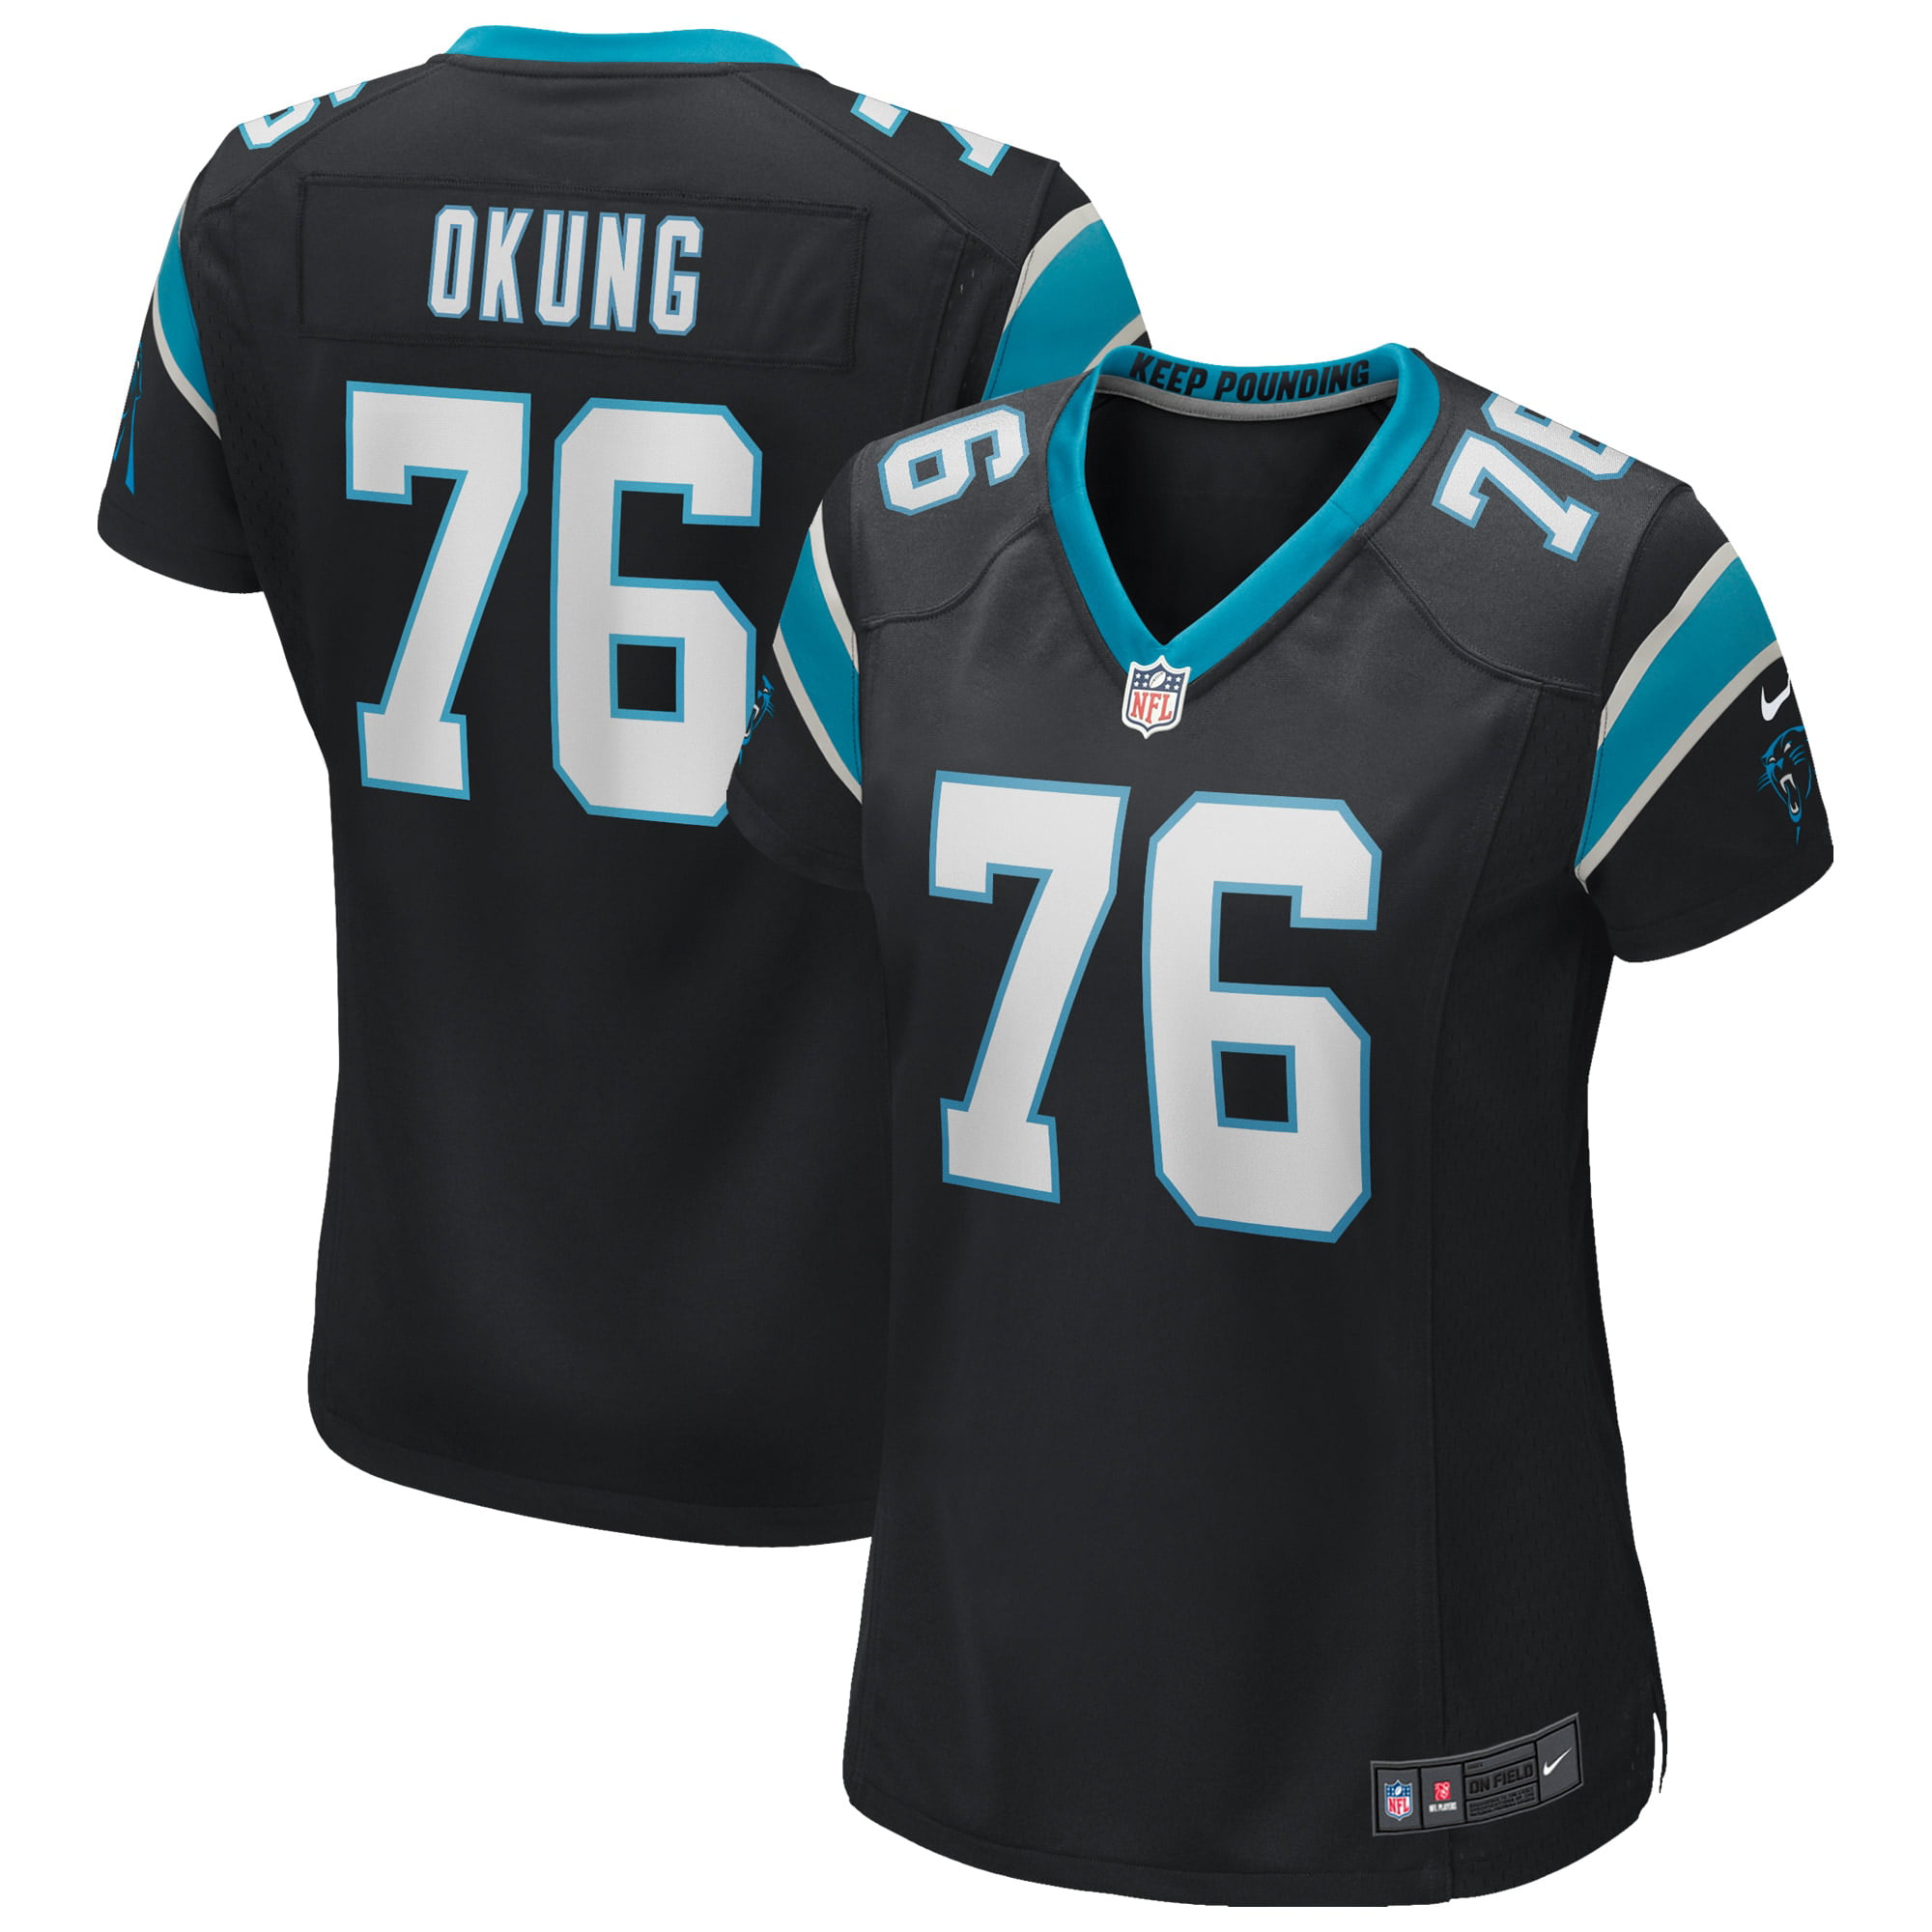 russell okung jersey